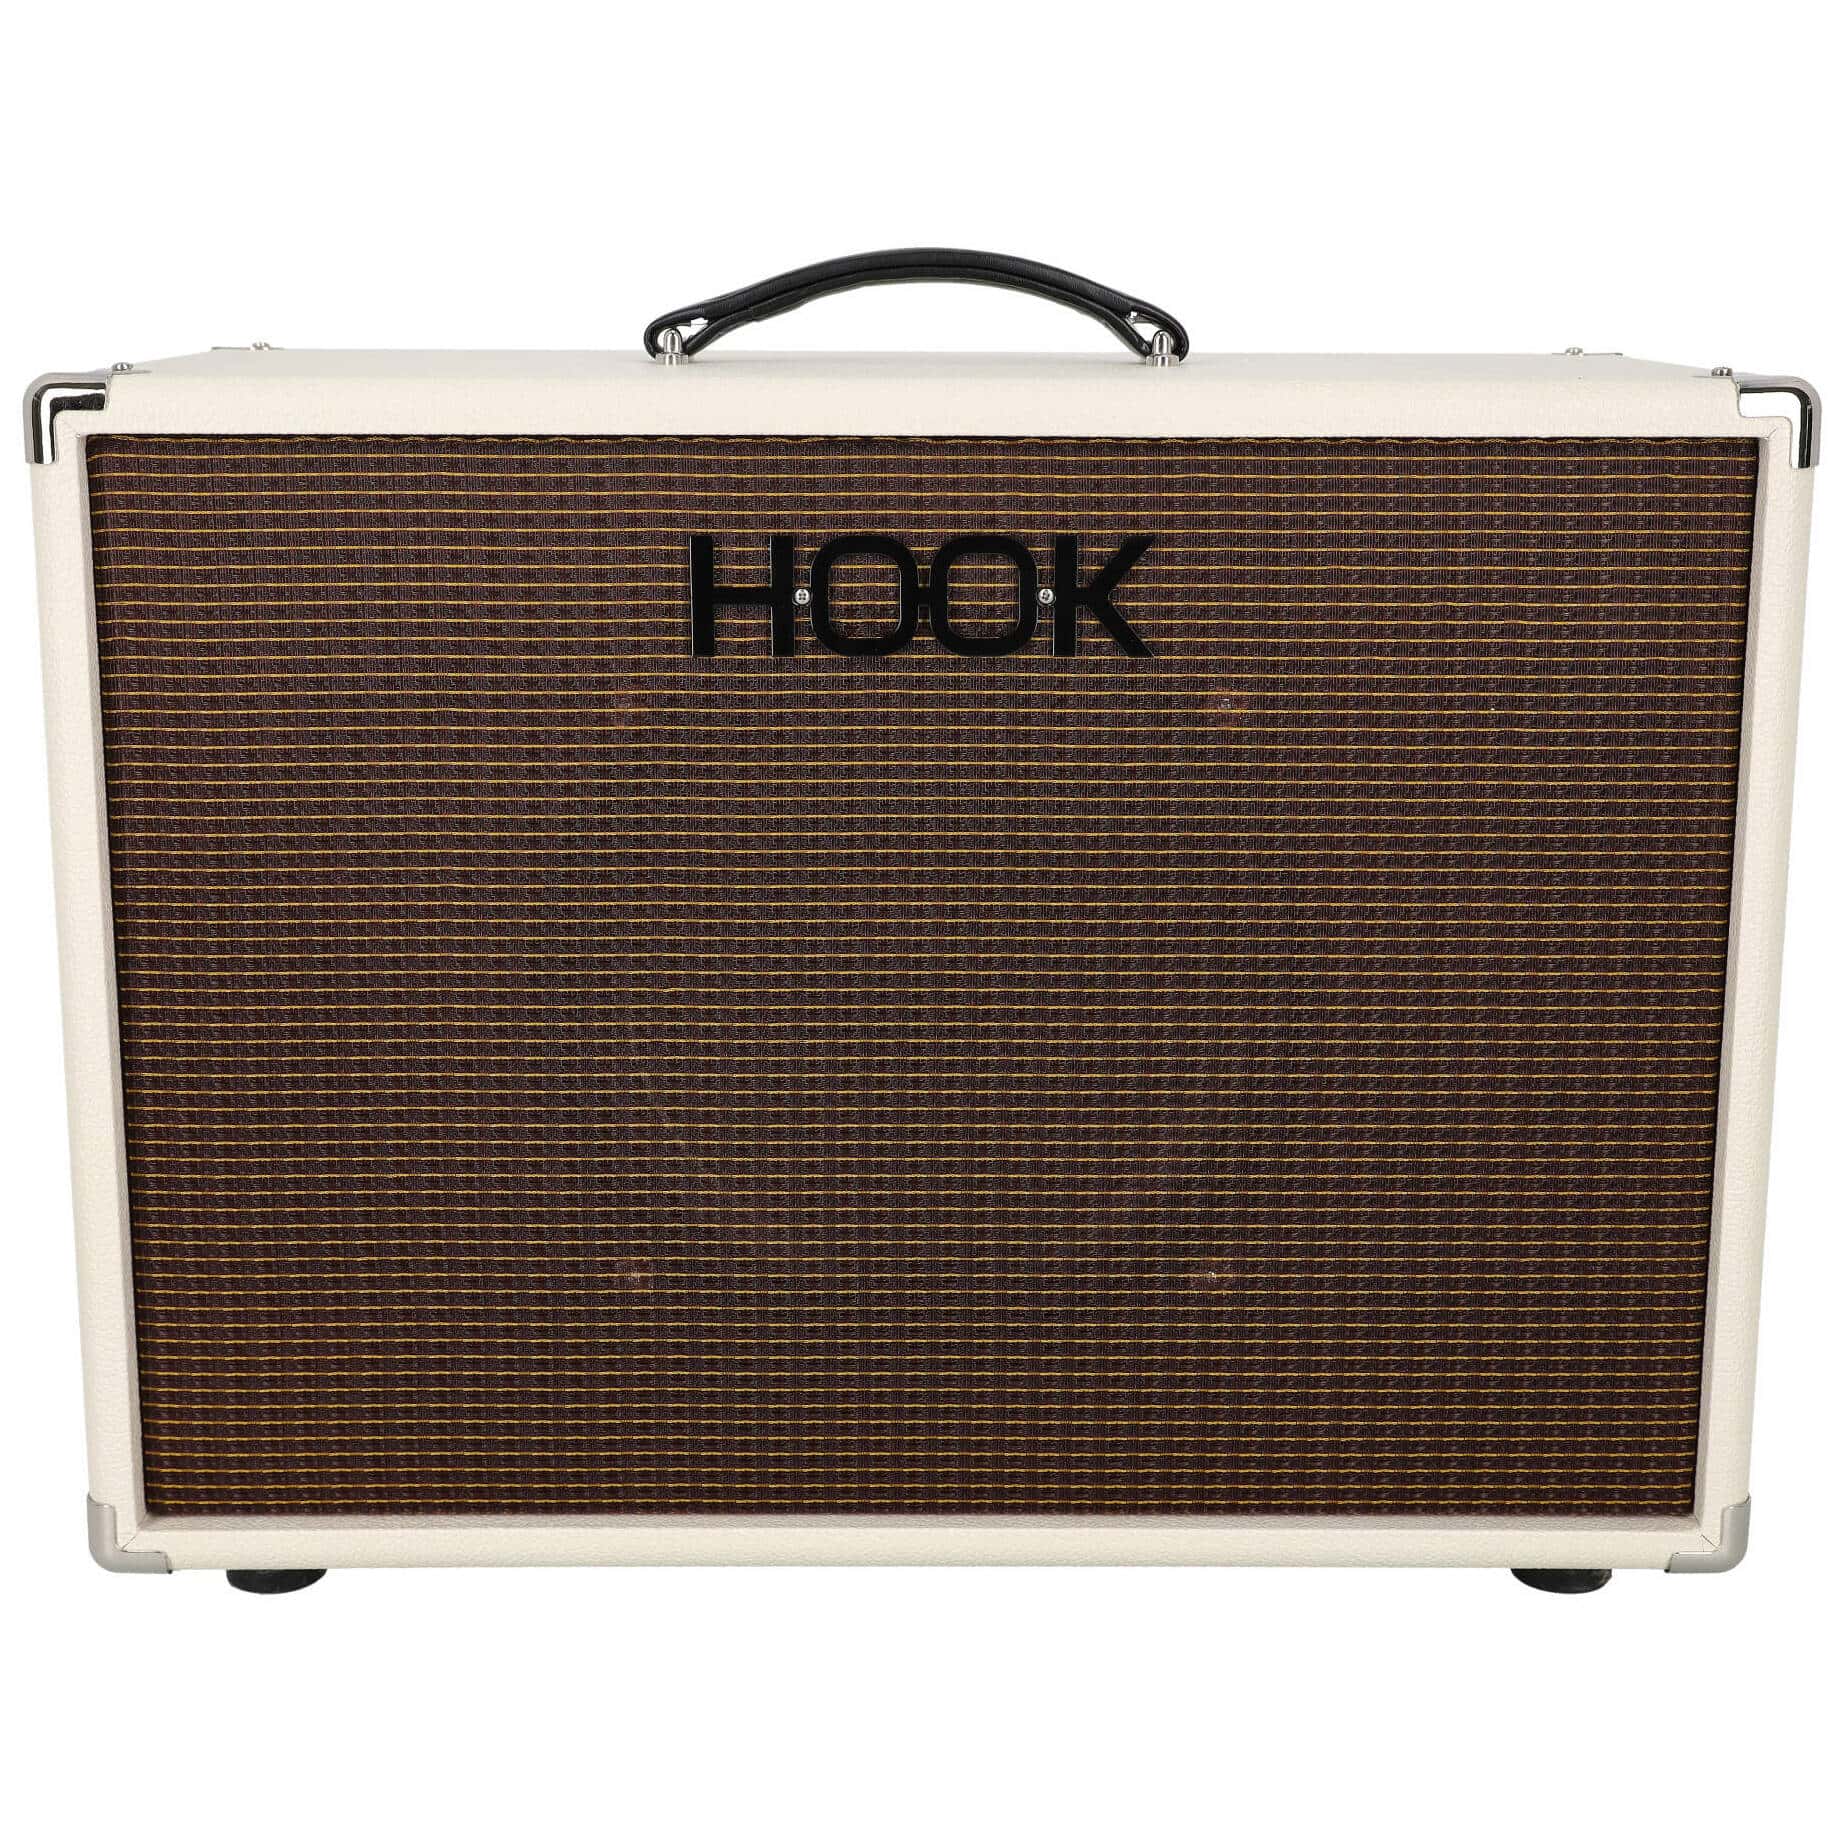 Hook Amplification 1x12 Wizard Cabinet WGS Oval Ivory Oxblood 2